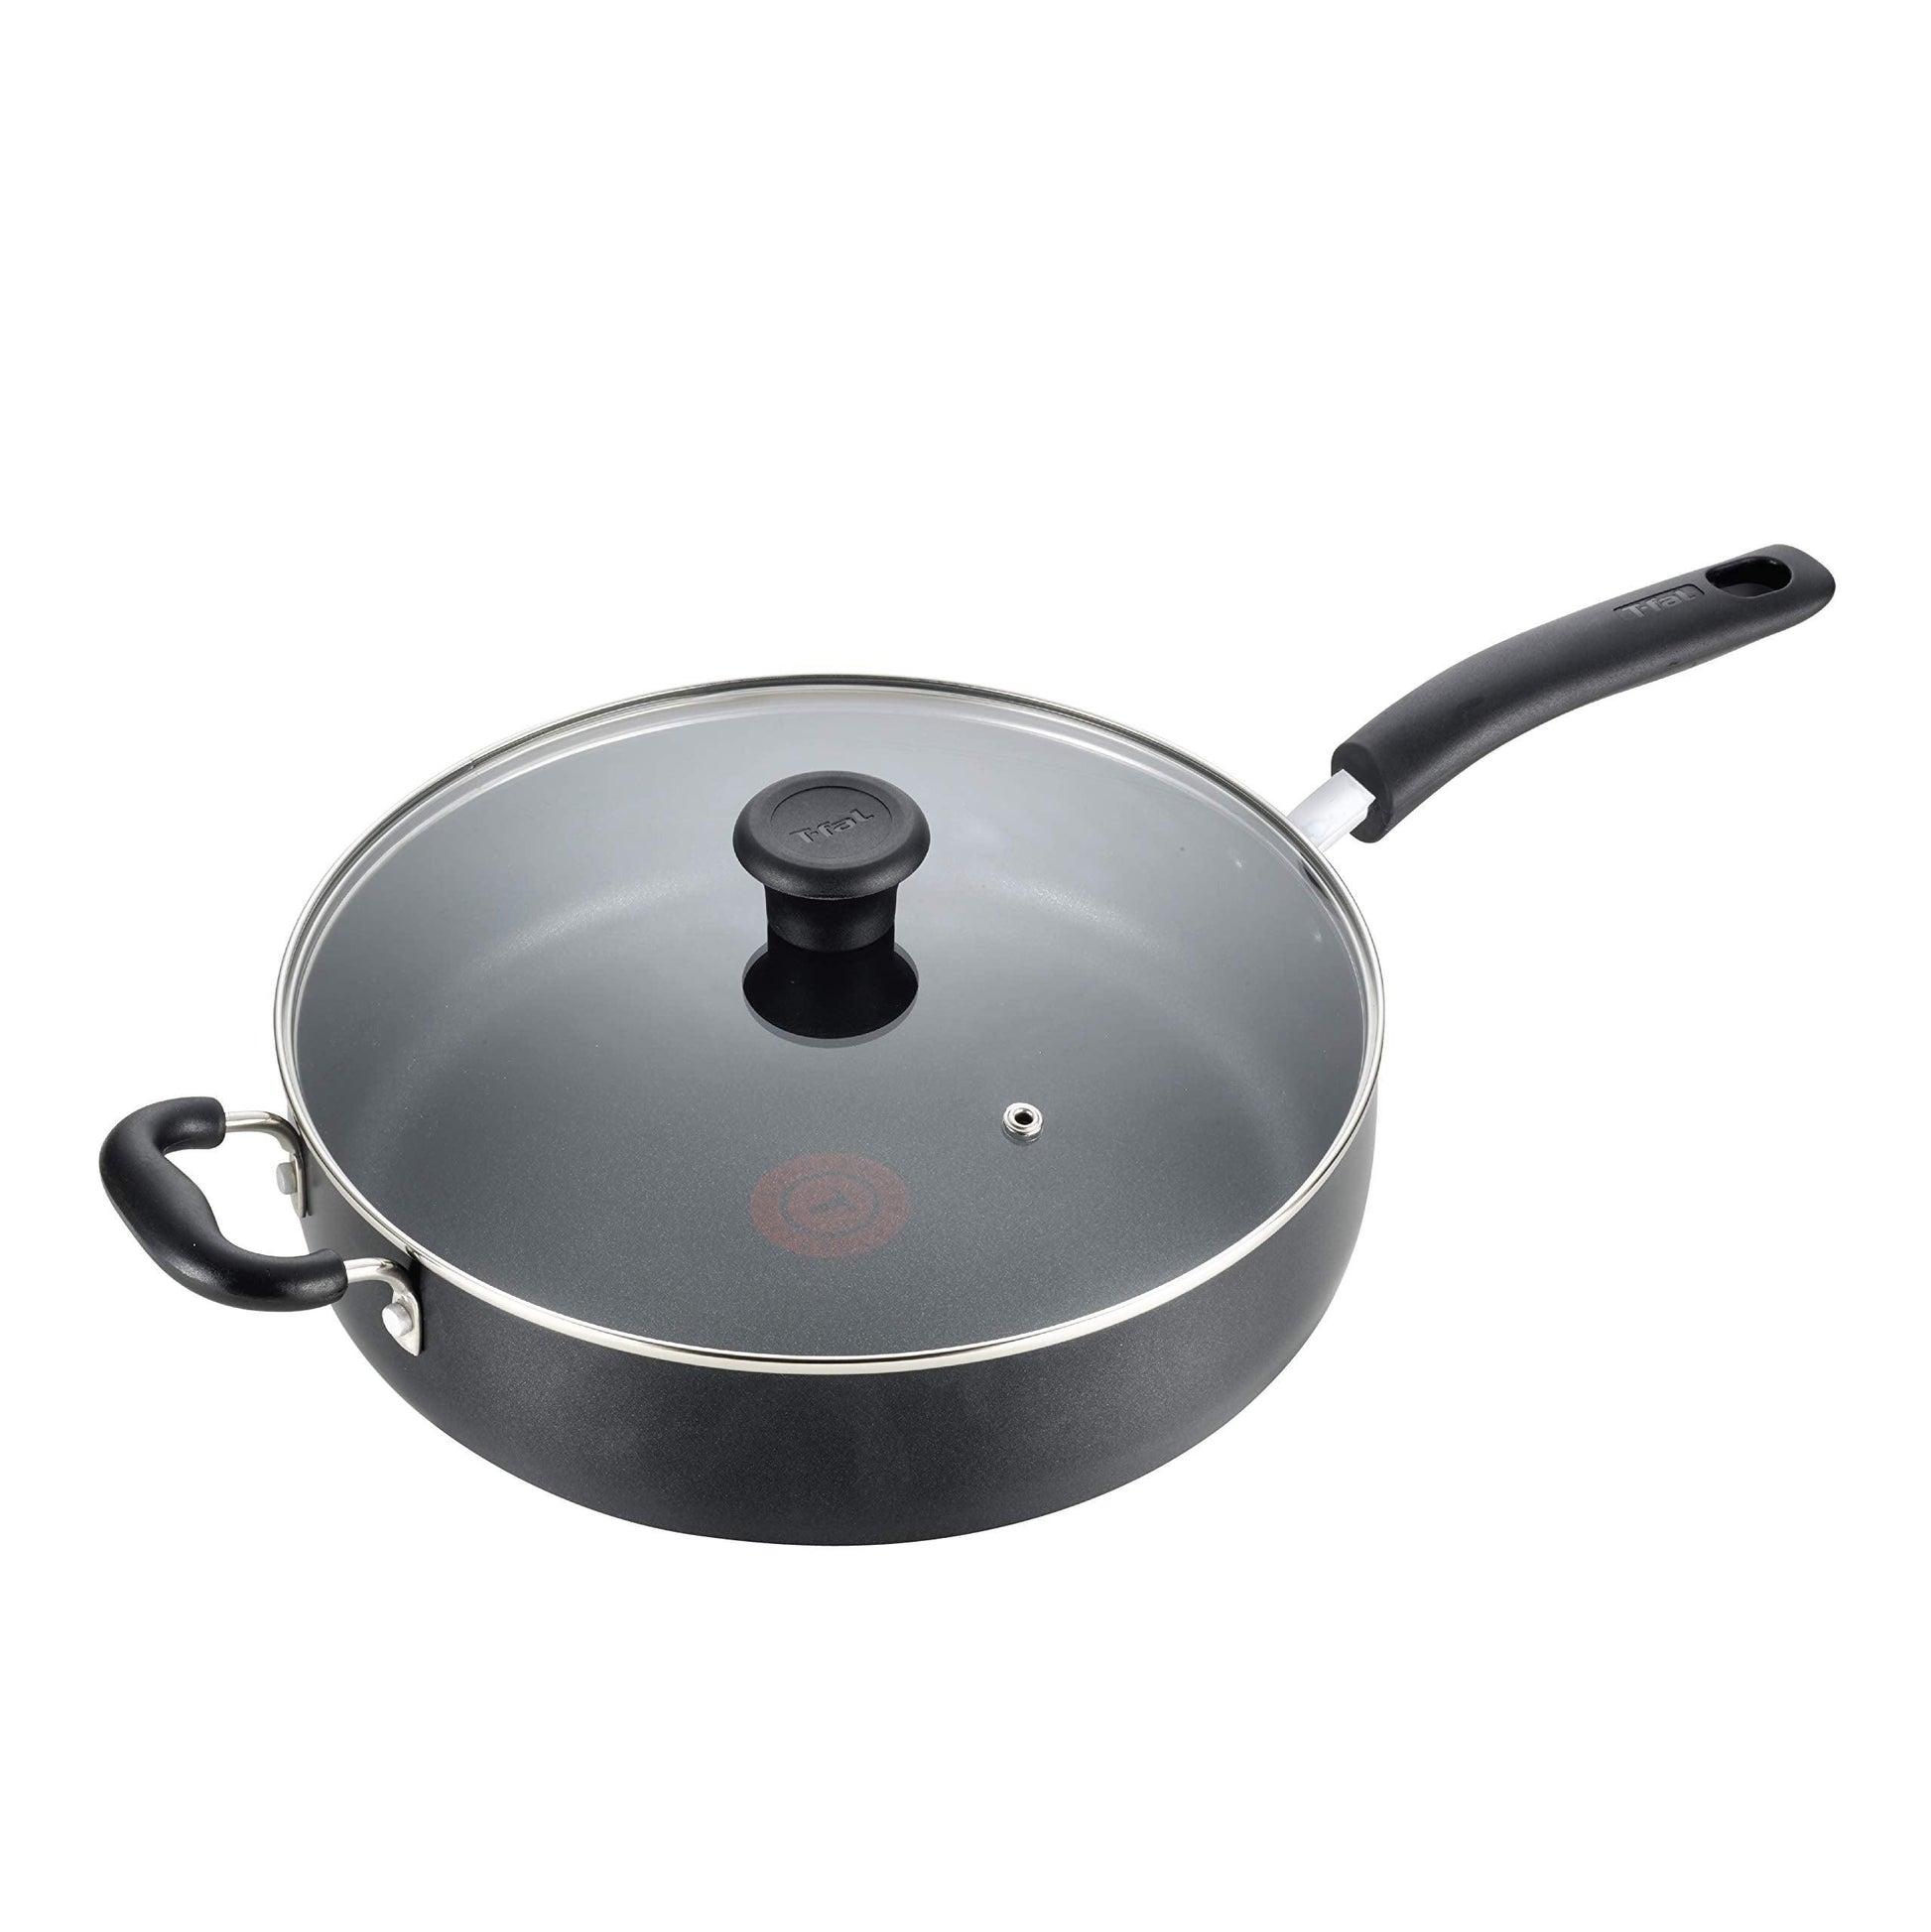 T-fal Specialty Nonstick Saute Pan with Glass Lid 5 Quart Oven Safe 350F Cookware, Pots and Pans, Dishwasher Safe Black - CookCave